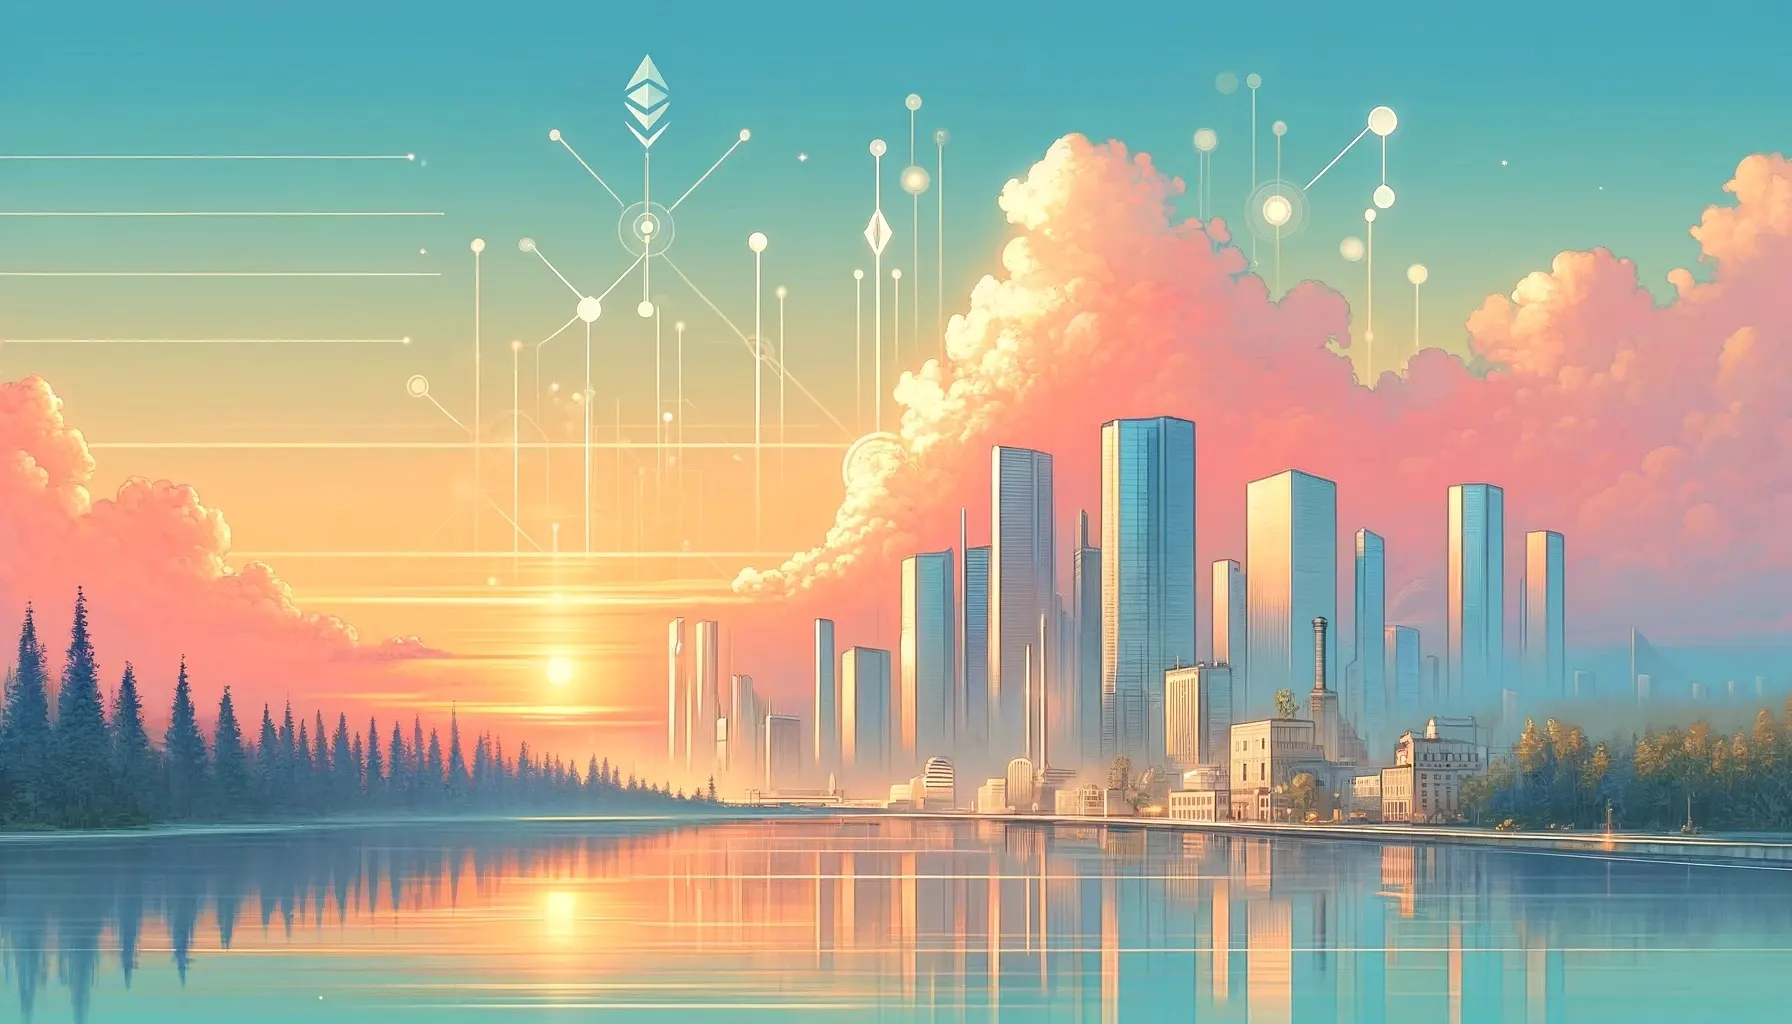 A futuristic cityscape with Ethereum's symbol integrated into the rising sun, reflecting on the water's surface, symbolizes the dawn of a new era in computational verifiability powered by Ethereum's blockchain technology and its potential to illuminate a path towards a transparent and accountable digital future.